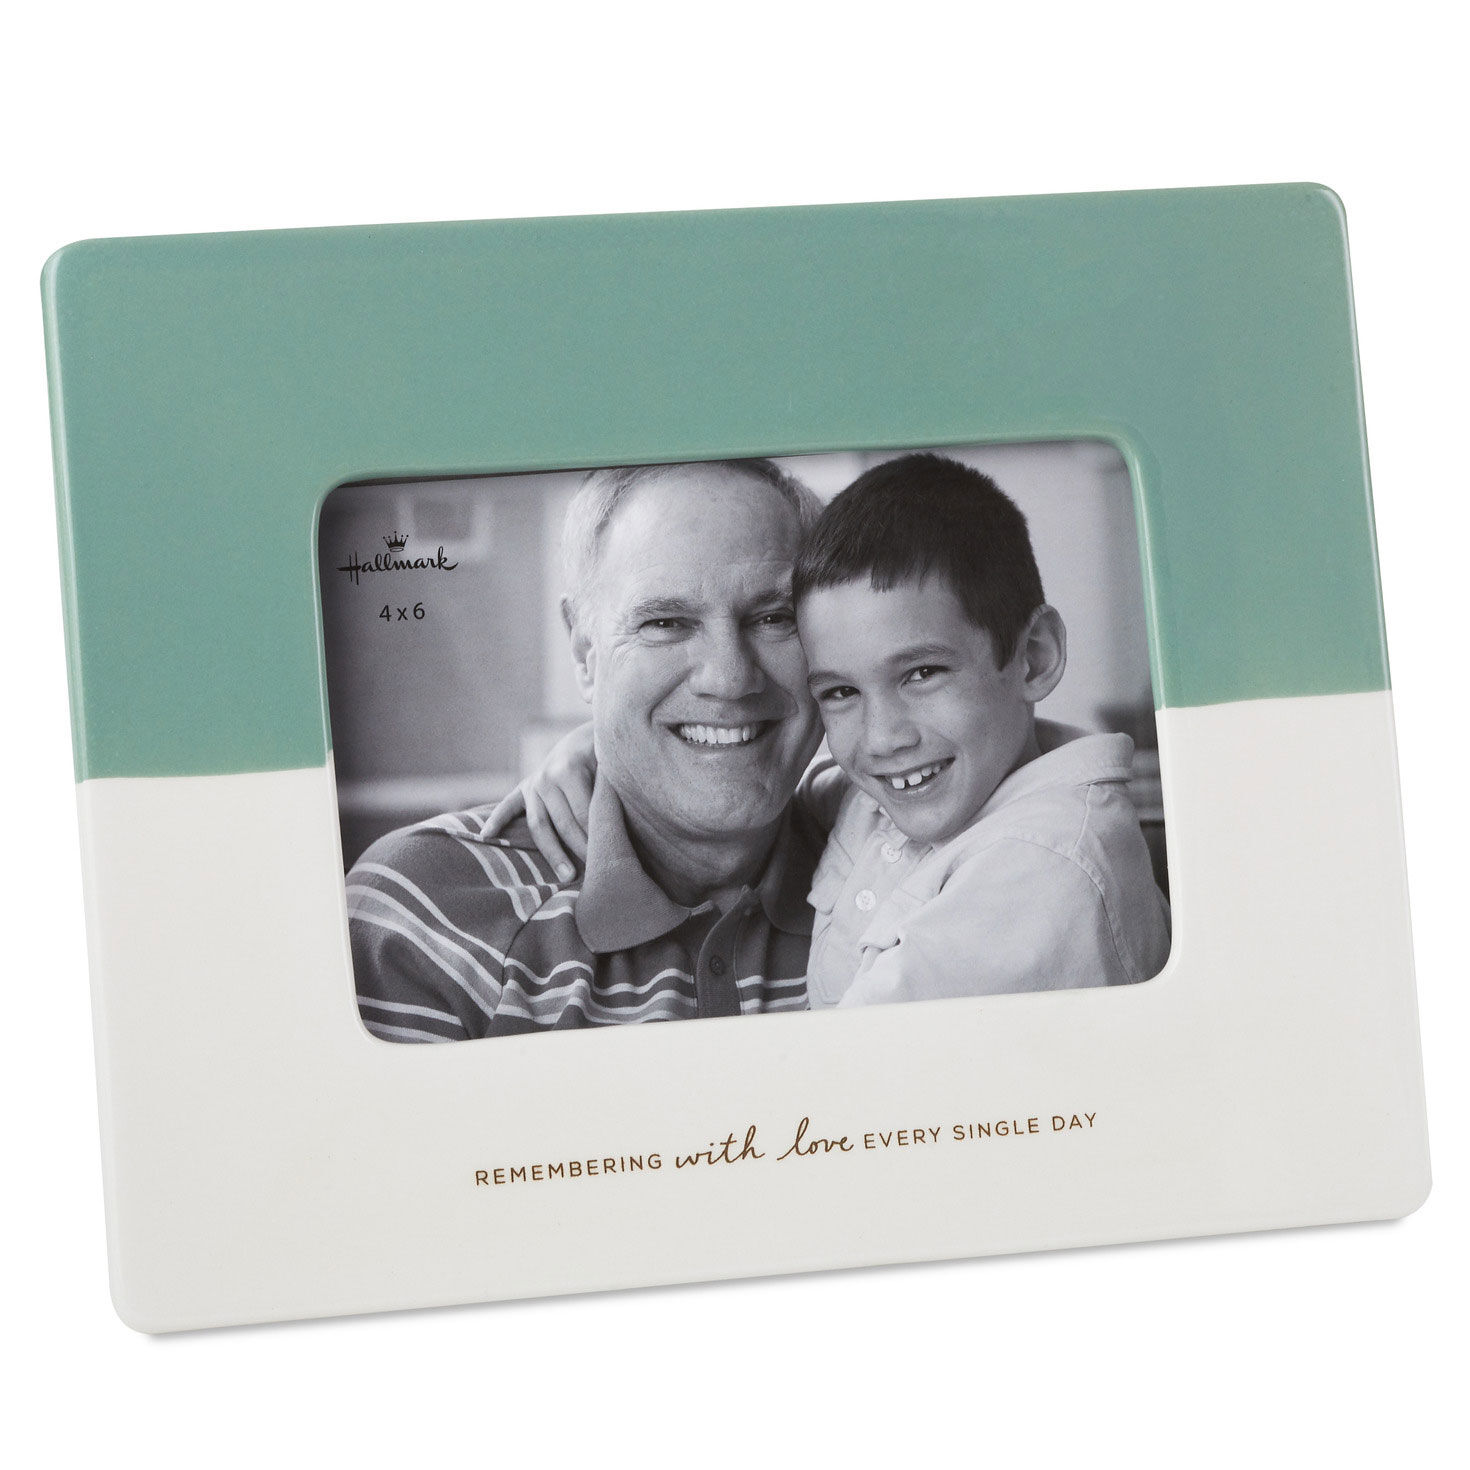 https://www.hallmark.com/dw/image/v2/AALB_PRD/on/demandware.static/-/Sites-hallmark-master/default/dw830b76ac/images/finished-goods/products/1BMK1623/4x6-Ceramic-Picture-Frame-for-Loss-of-Loved-One_1BMK1623_01.jpg?sfrm=jpg